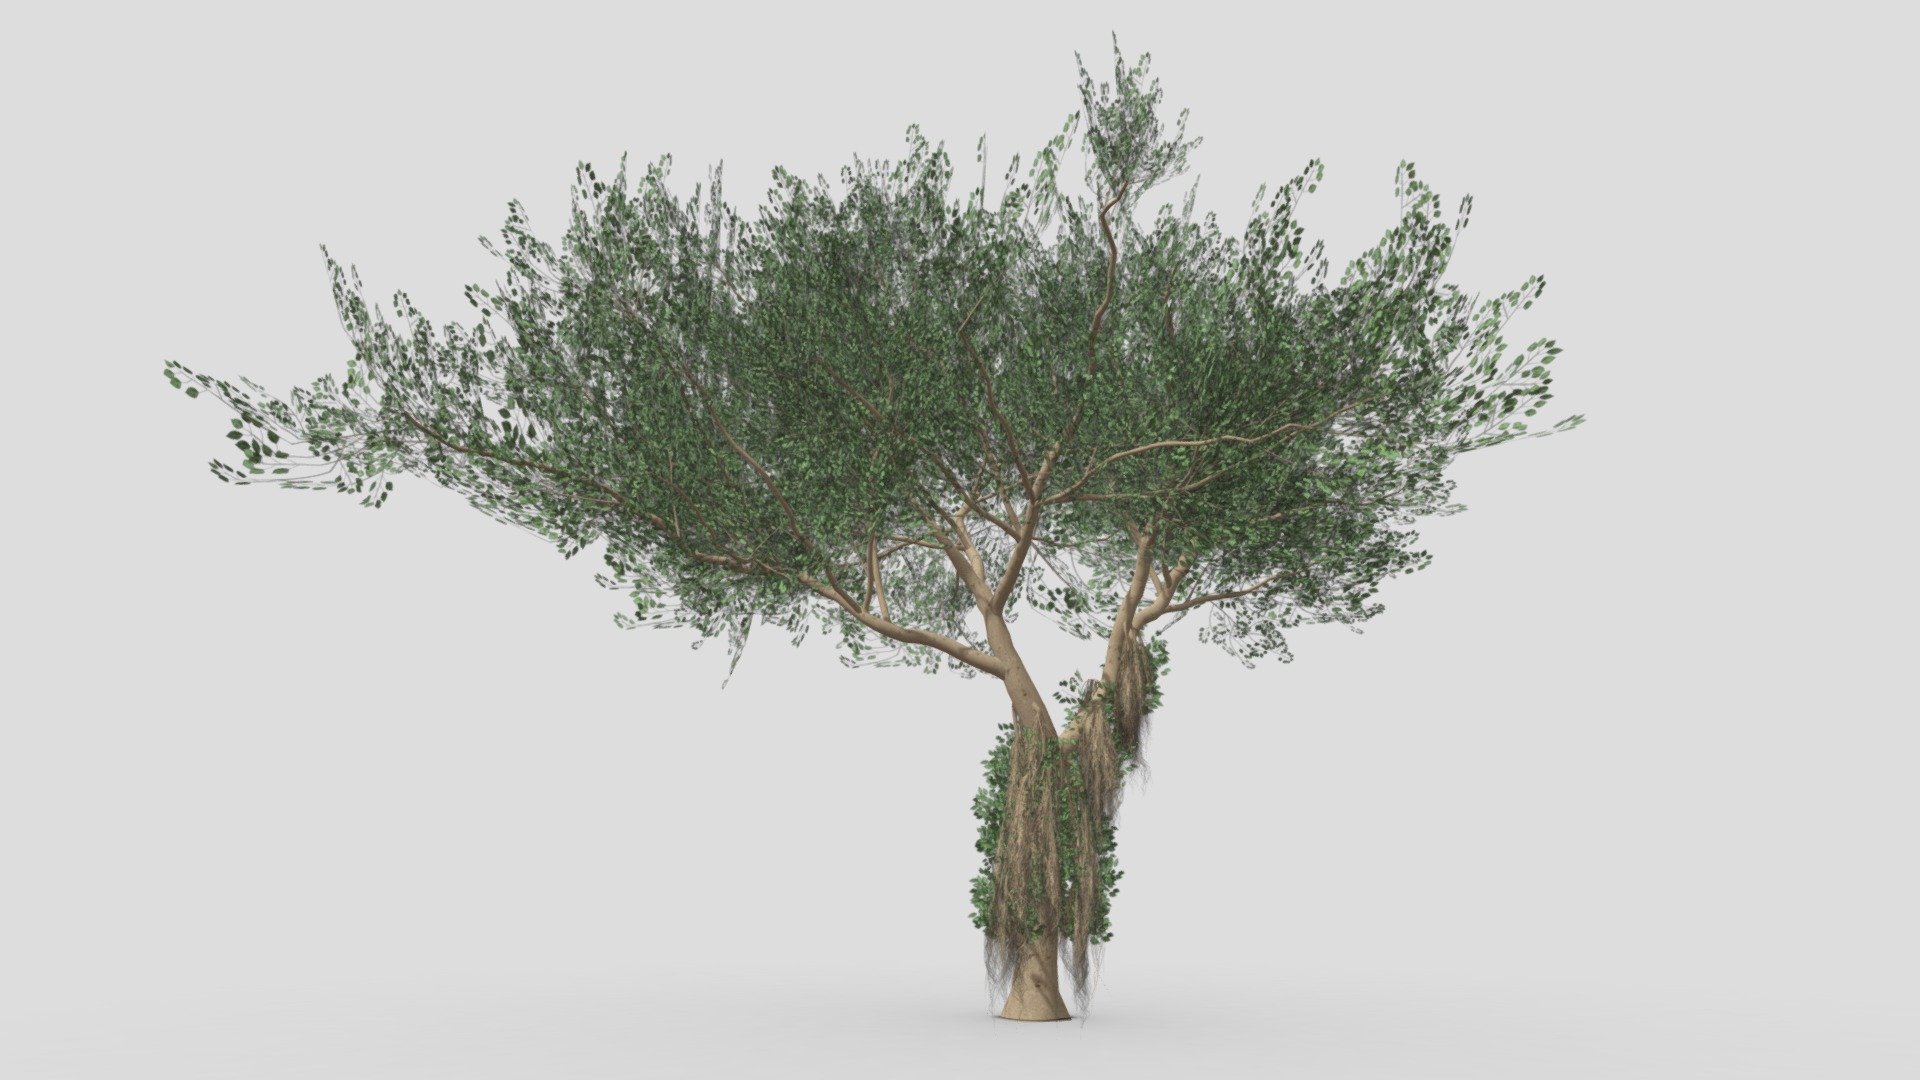 I try to work on Ficus Benjamina Tree to use this in your project. this is a low poly 3D model. Tree info: Ficus Benjamina, commonly known as weeping fig, benjamin fig, or ficus tree, and often sold in stores as just ficus, is a species of flowering plant in the family Moraceae, native to Asia and Australia. It is the official tree of Bangkok 3d model